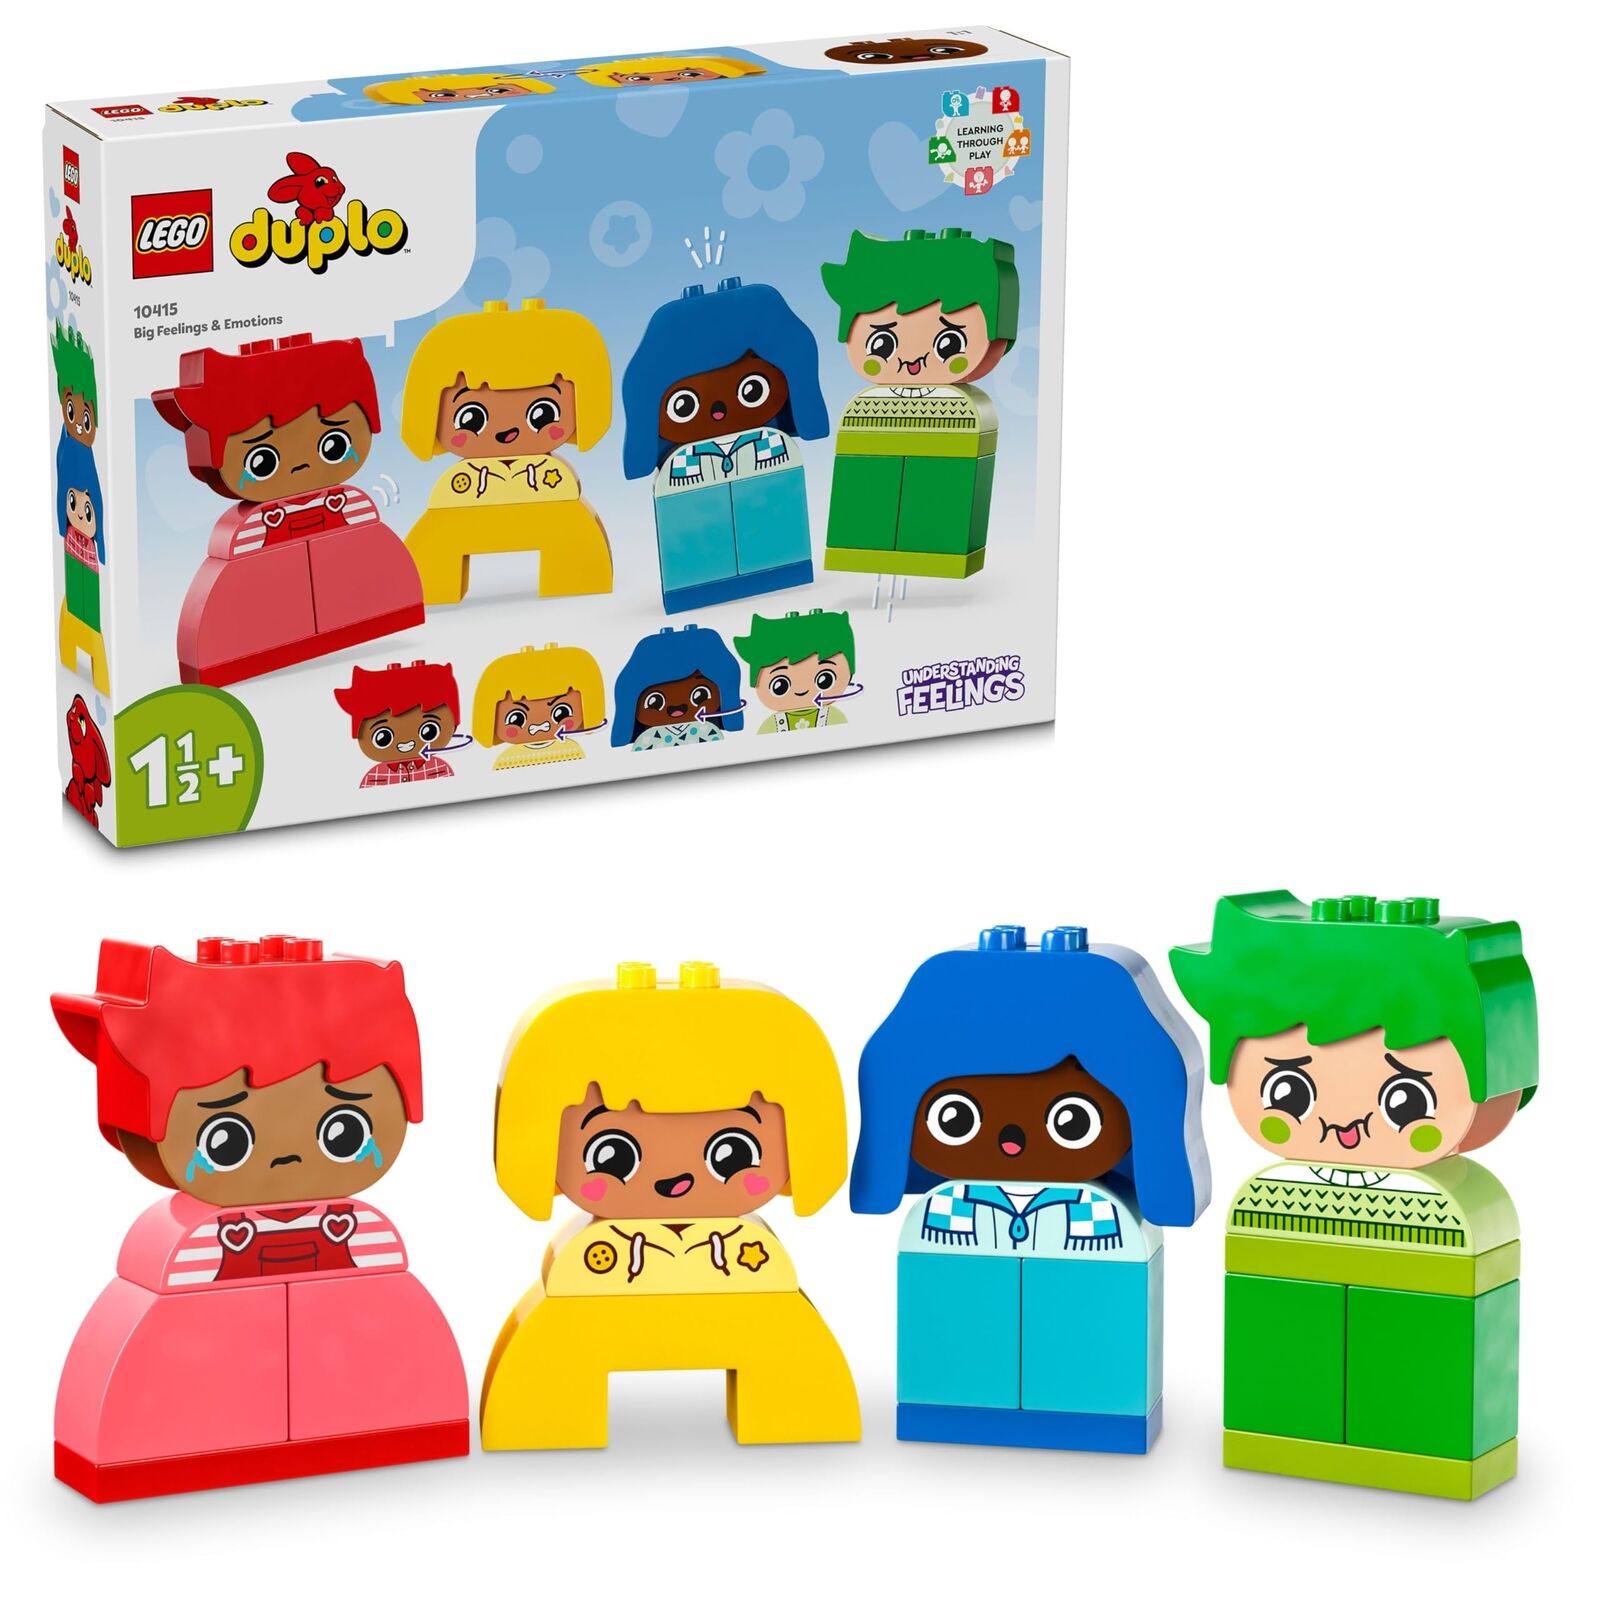 LEGO Duplo First Duplo Various Friends Toys Present Blocks Infants Baby Boys